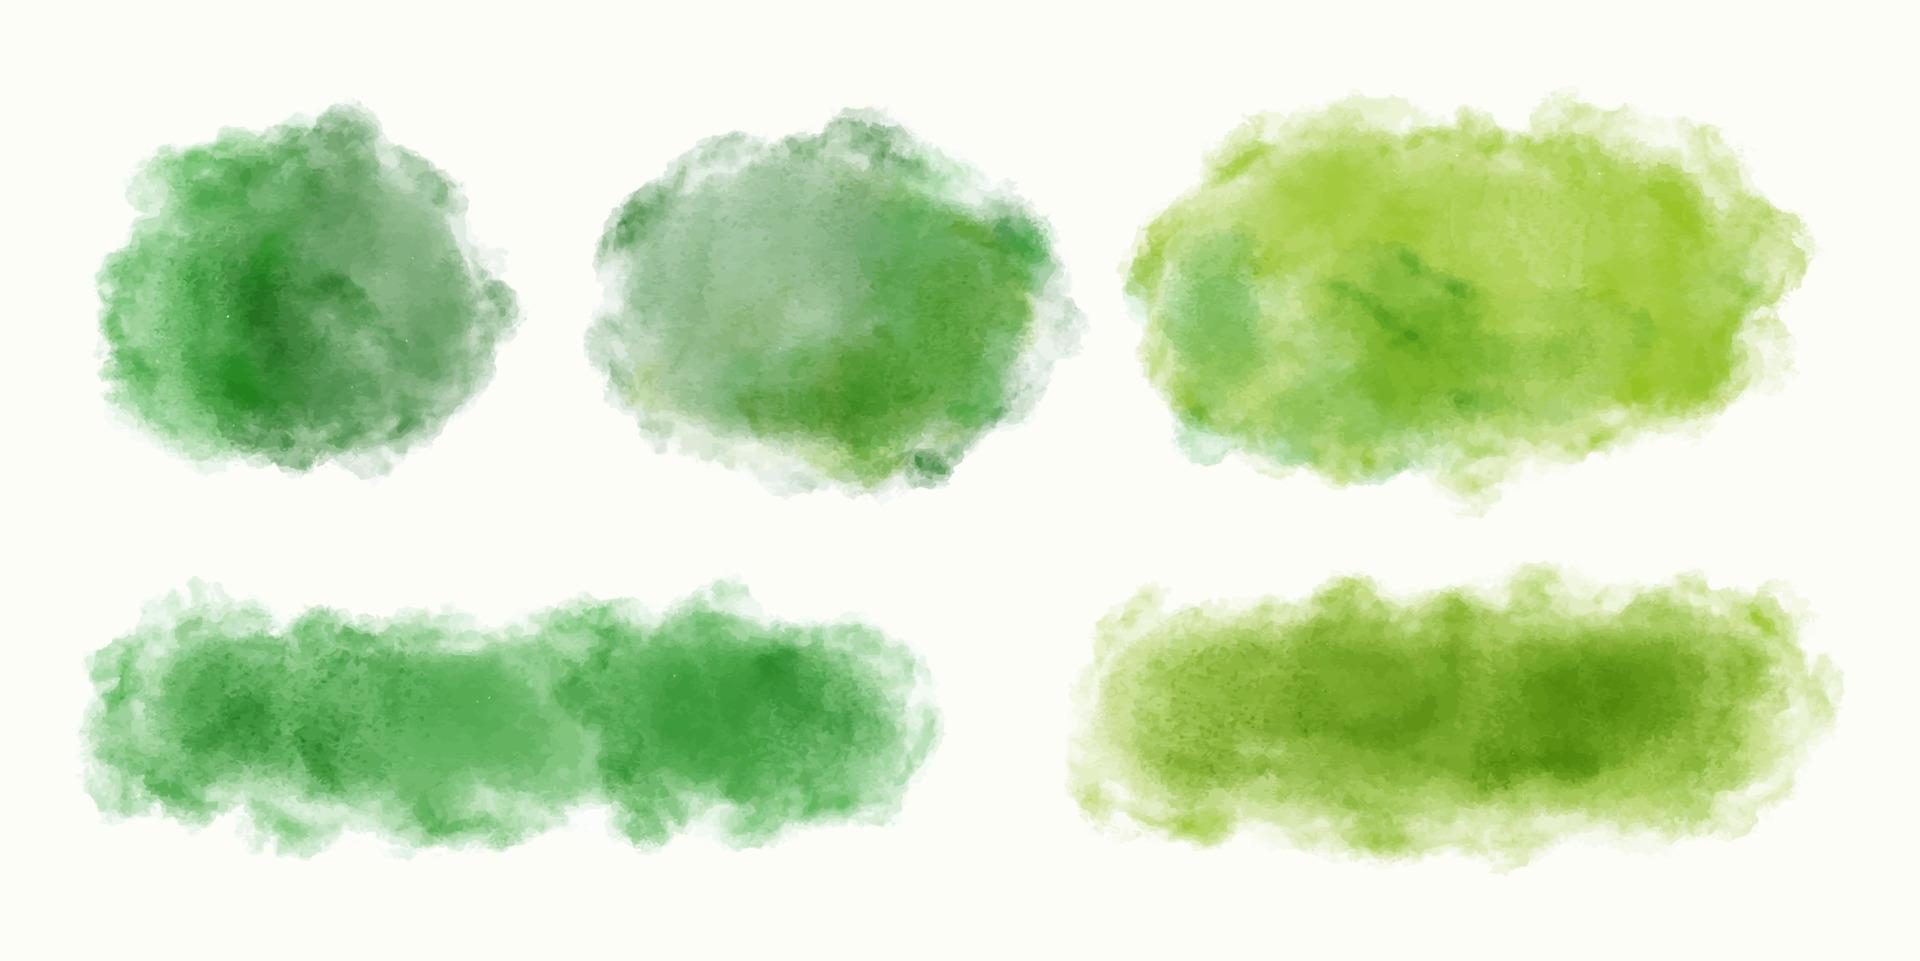 Green watercolor stains and stripes isolated on white. Hand painted, vector illustration